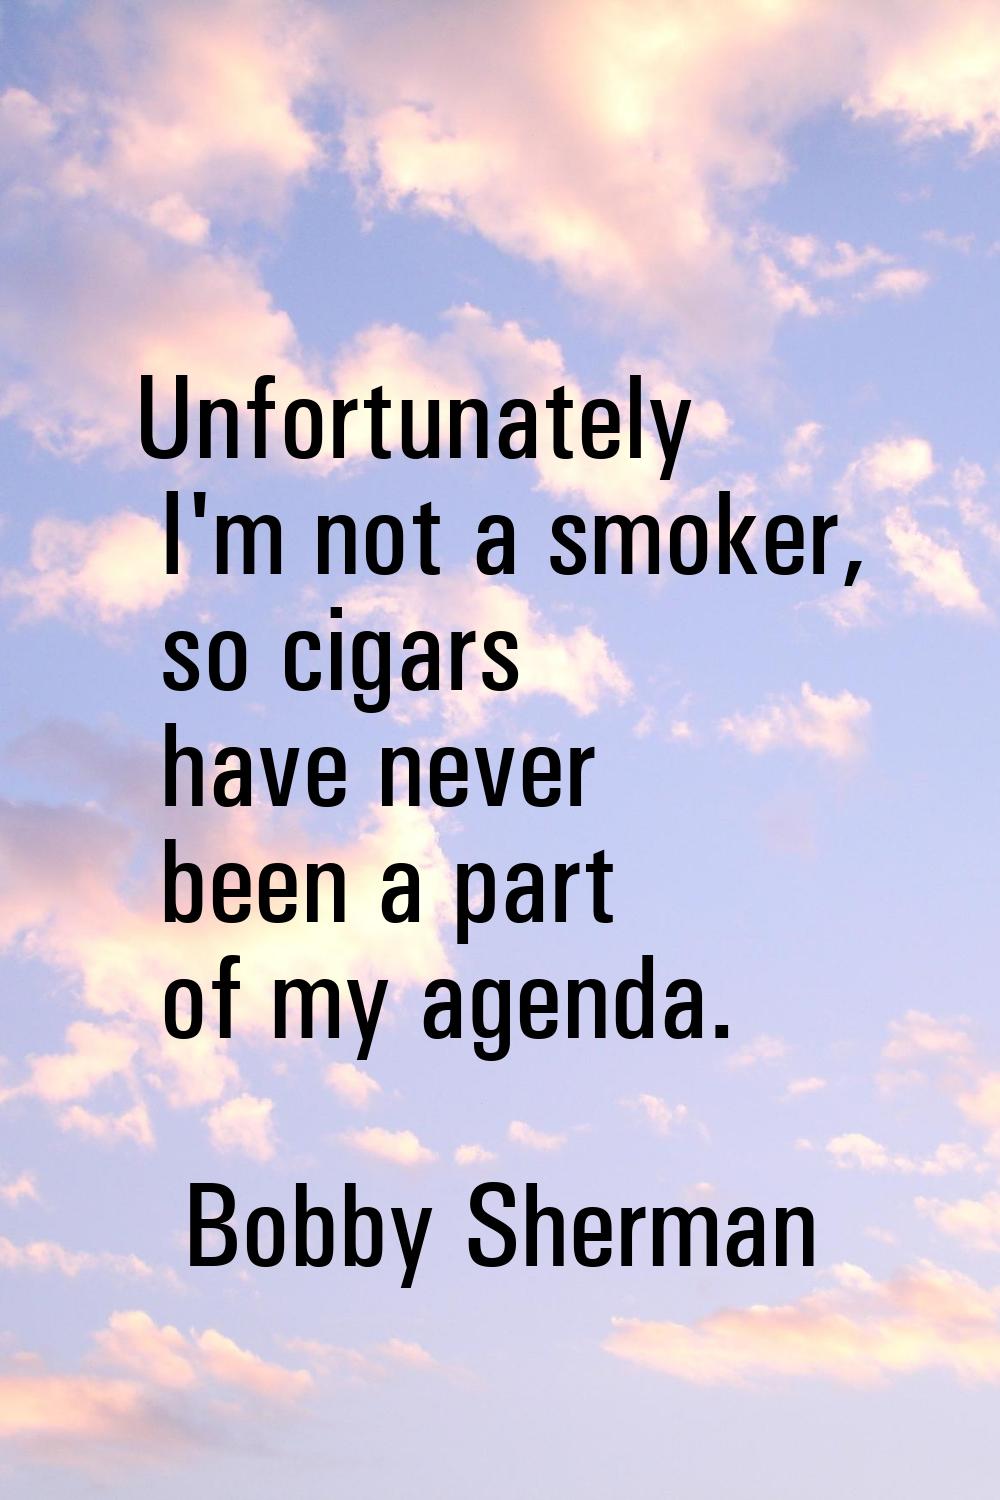 Unfortunately I'm not a smoker, so cigars have never been a part of my agenda.